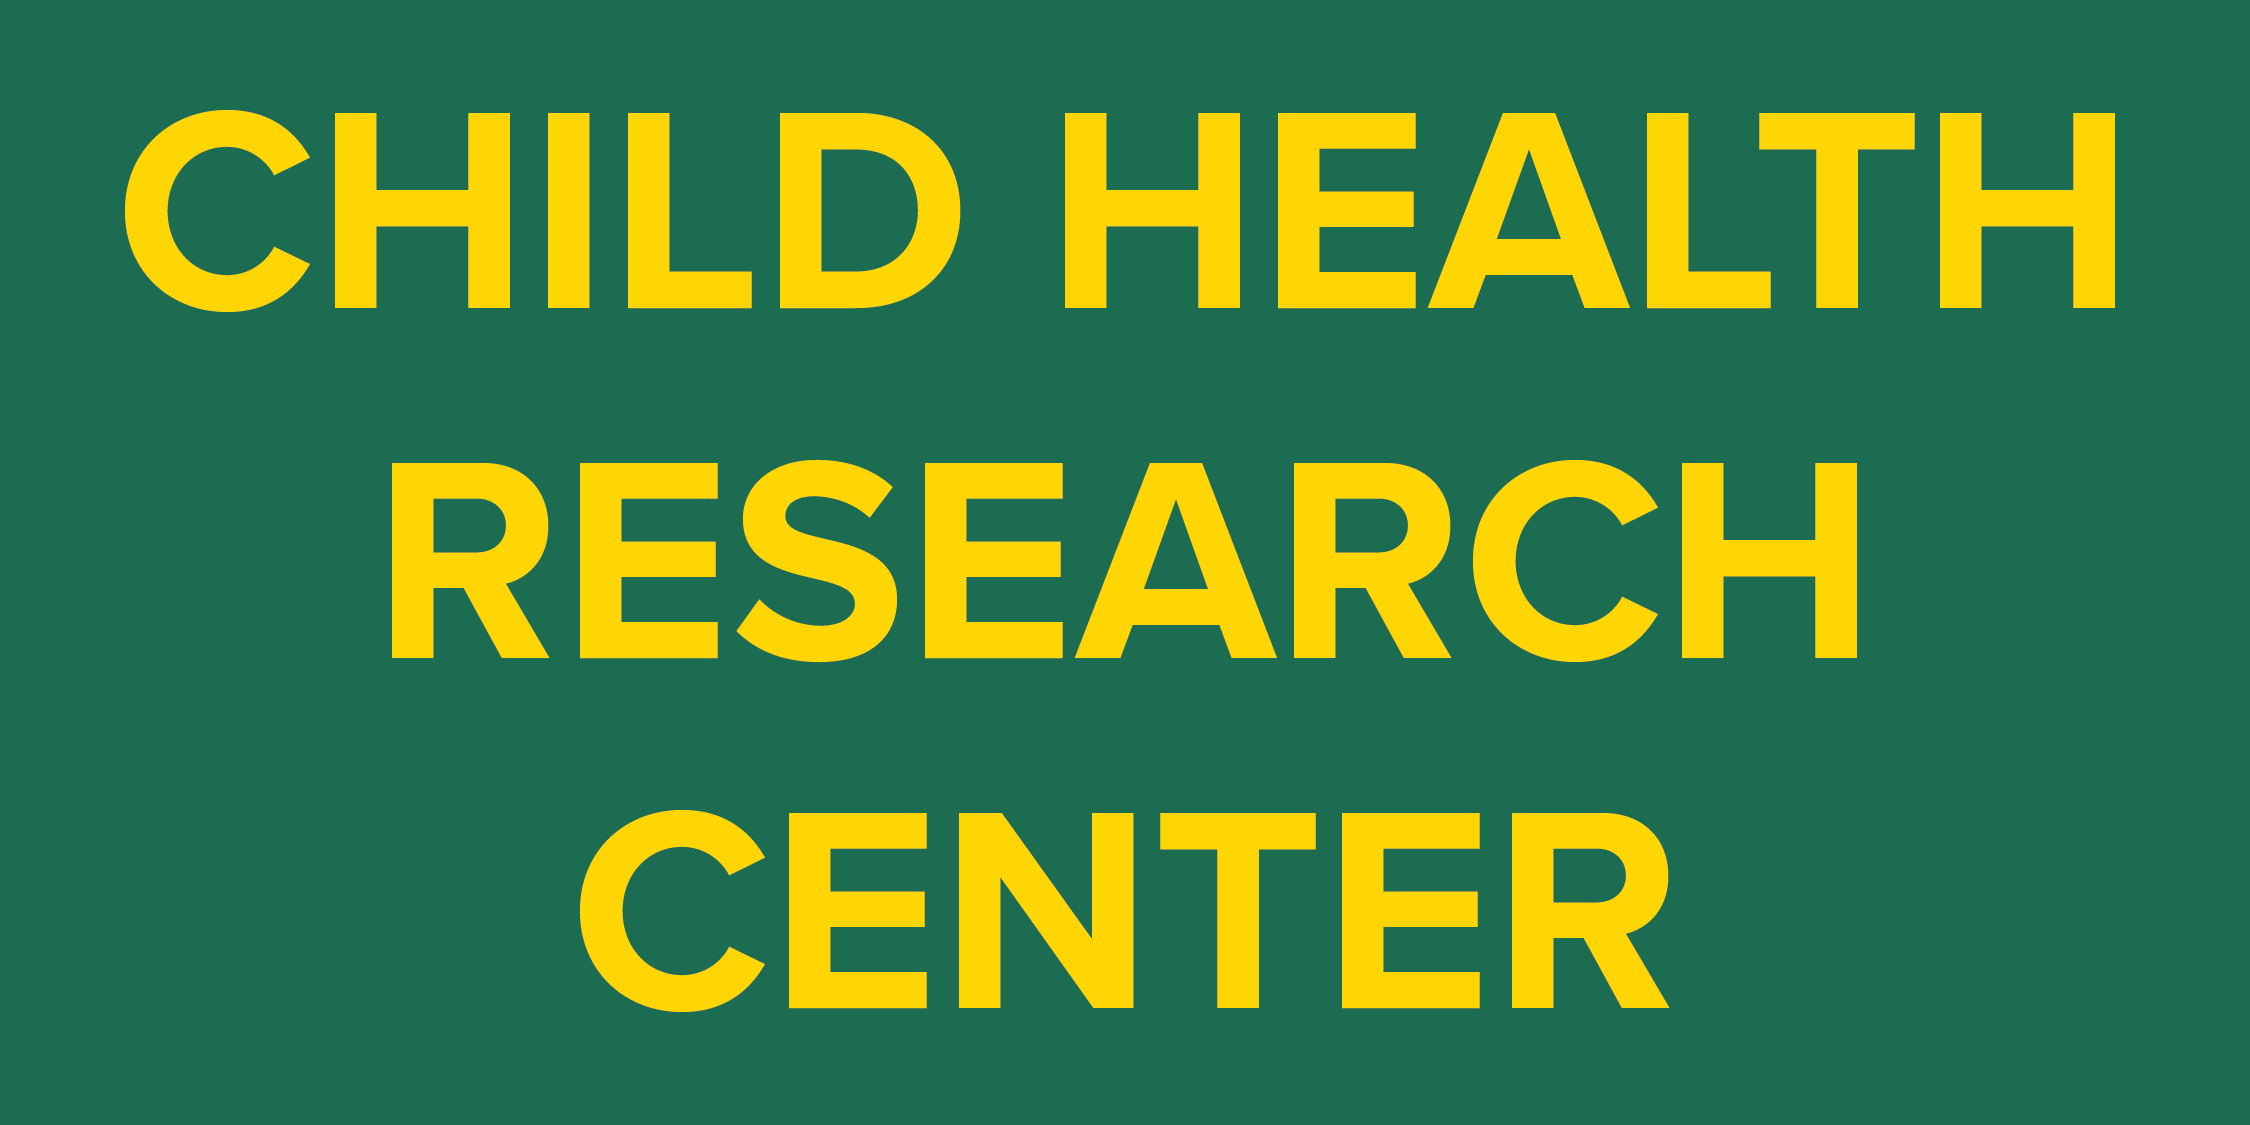 1991- Child Health Research Center (CHRC) is Established